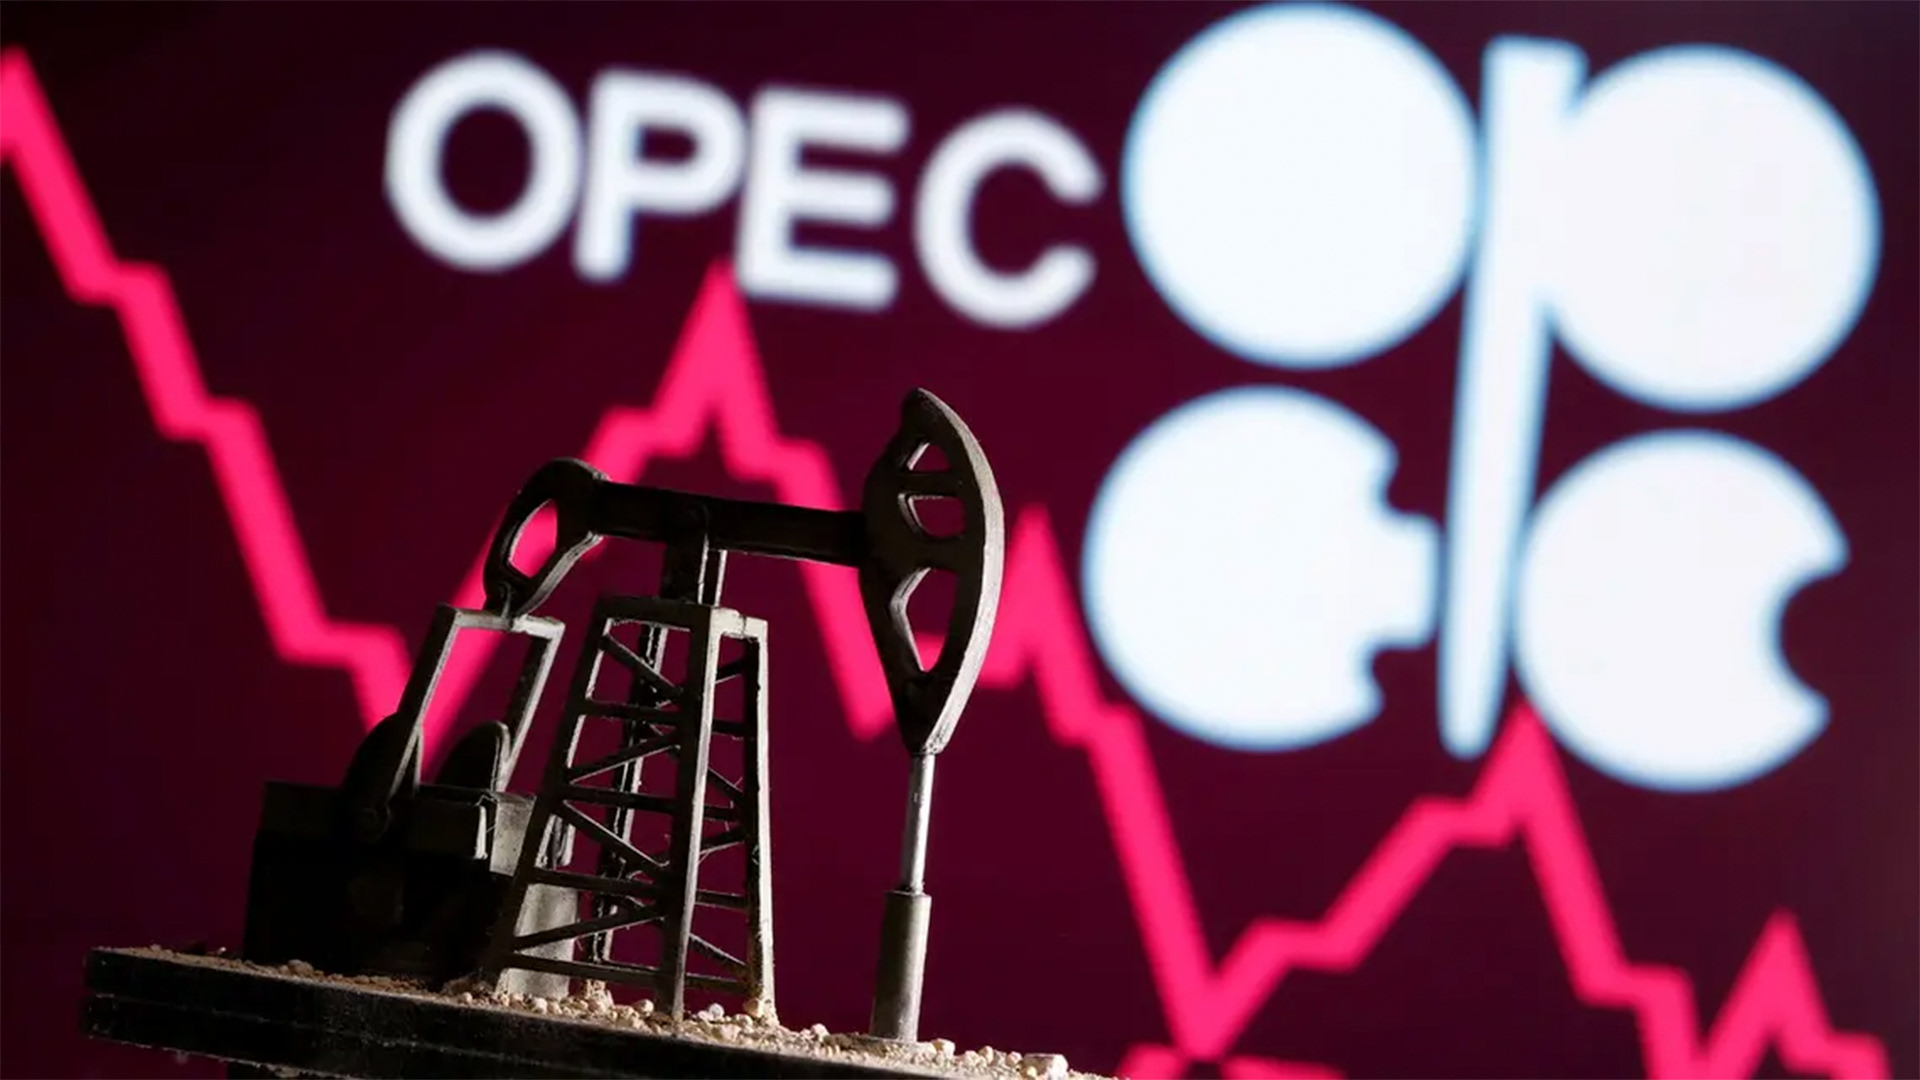 OPEC Must Seize the Opportunity to Modernize Its Image